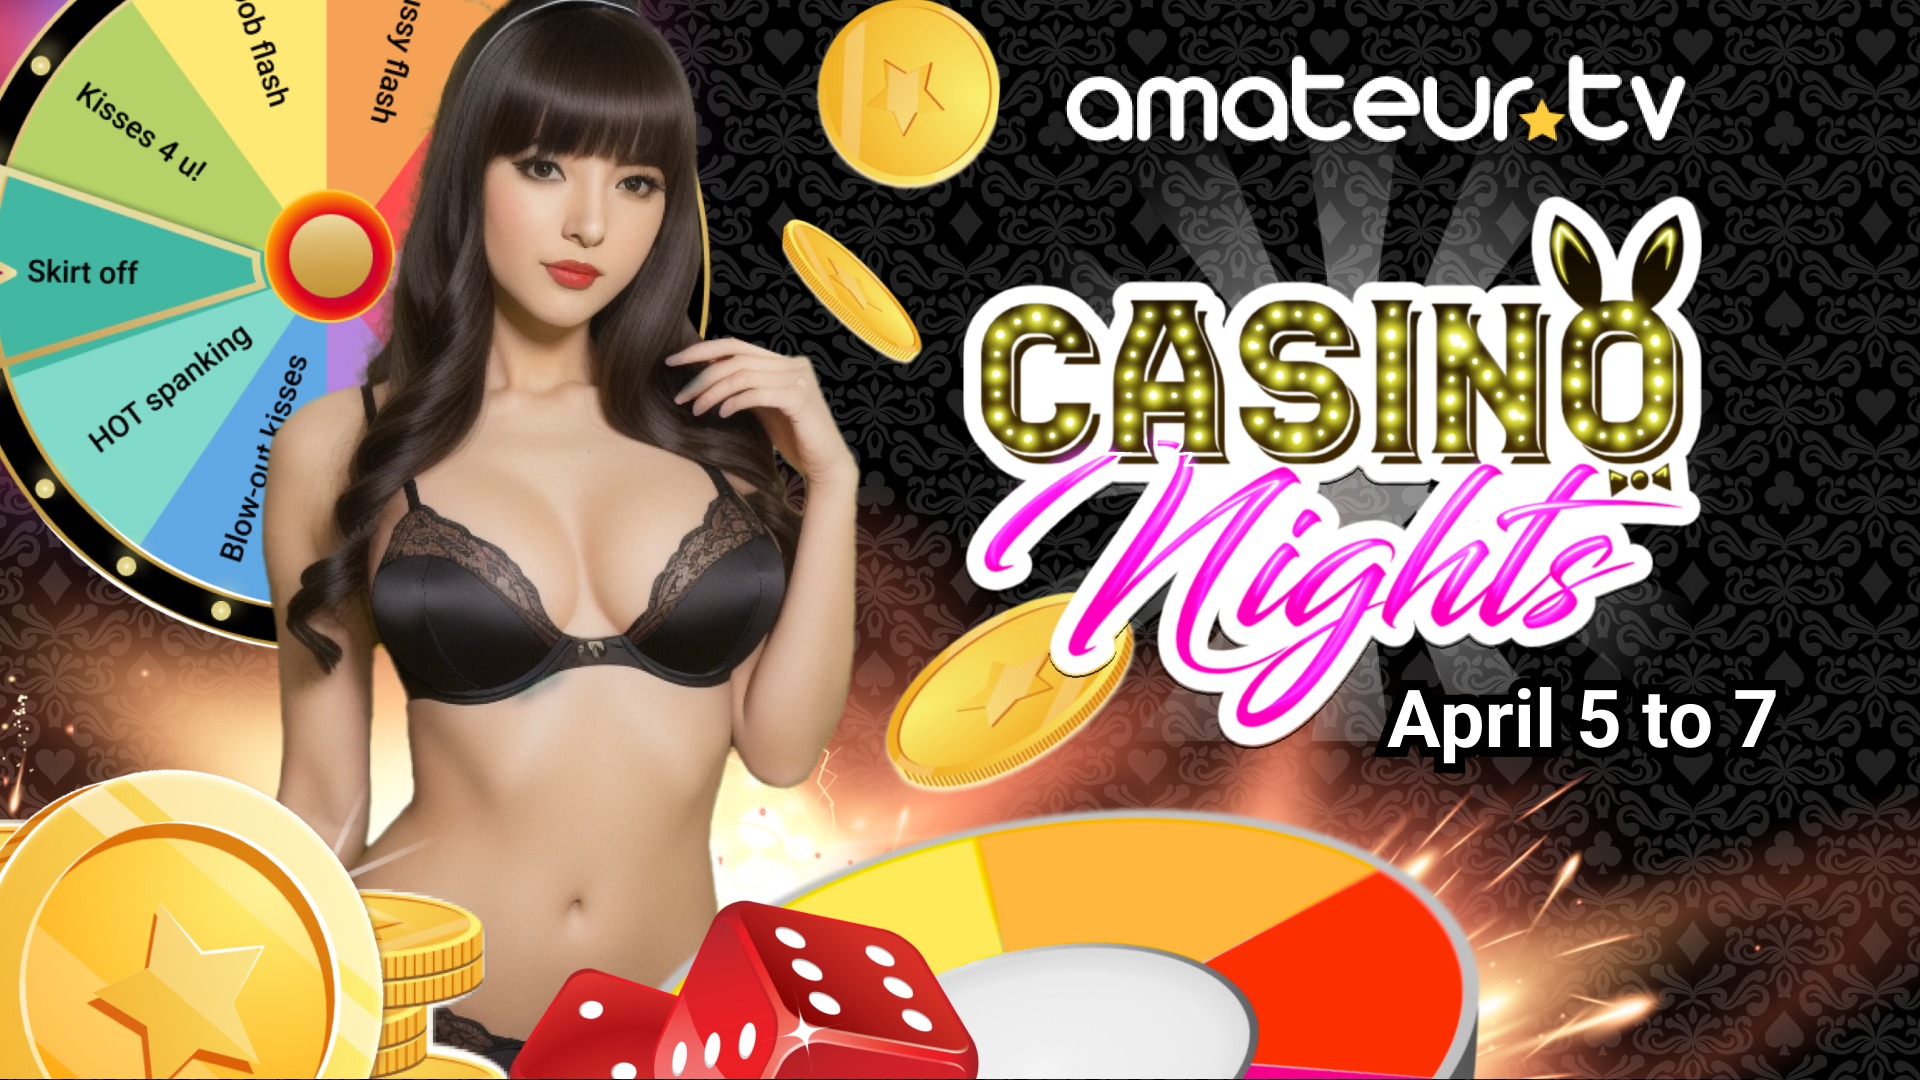 The "Casino Night 2024" event is coming on Amateur.tv for you and your fans to have fun playing games of chance.